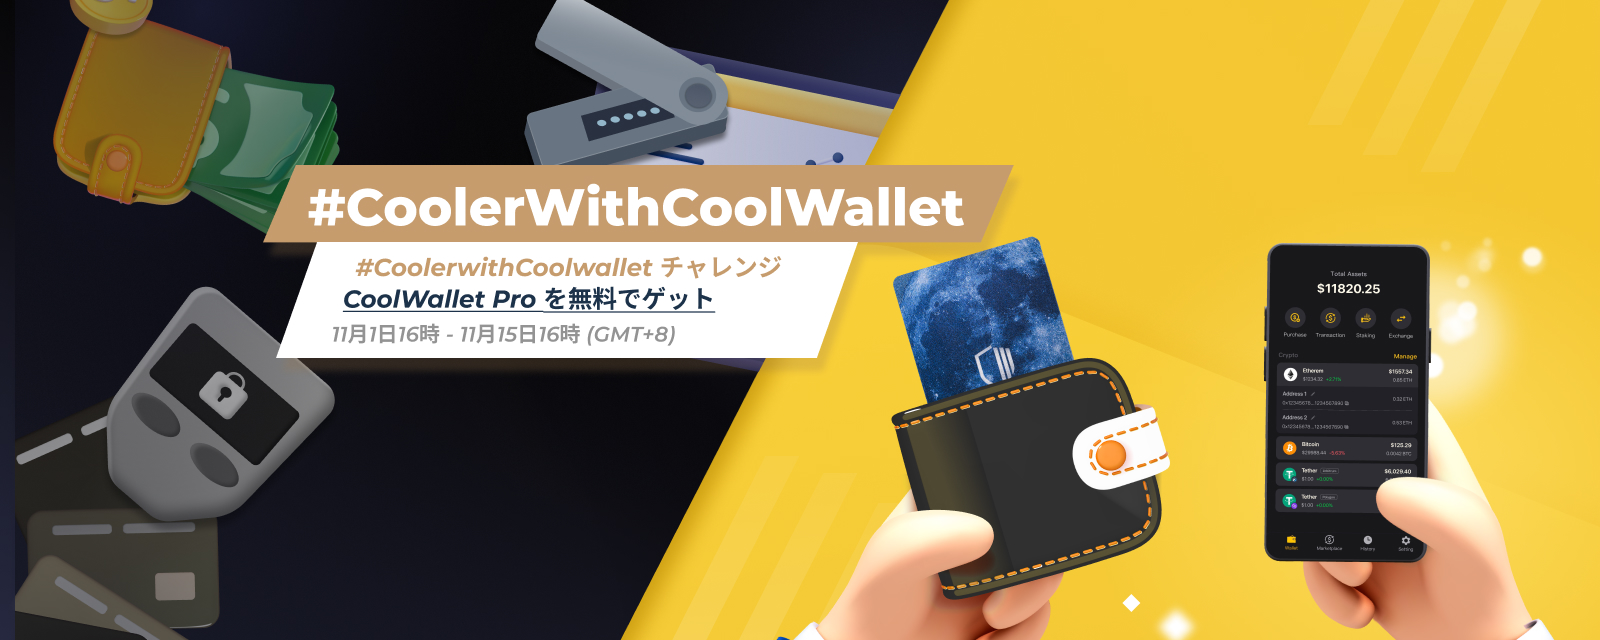 CoolerwithCoolWallet-banner-JP-1600x640-1